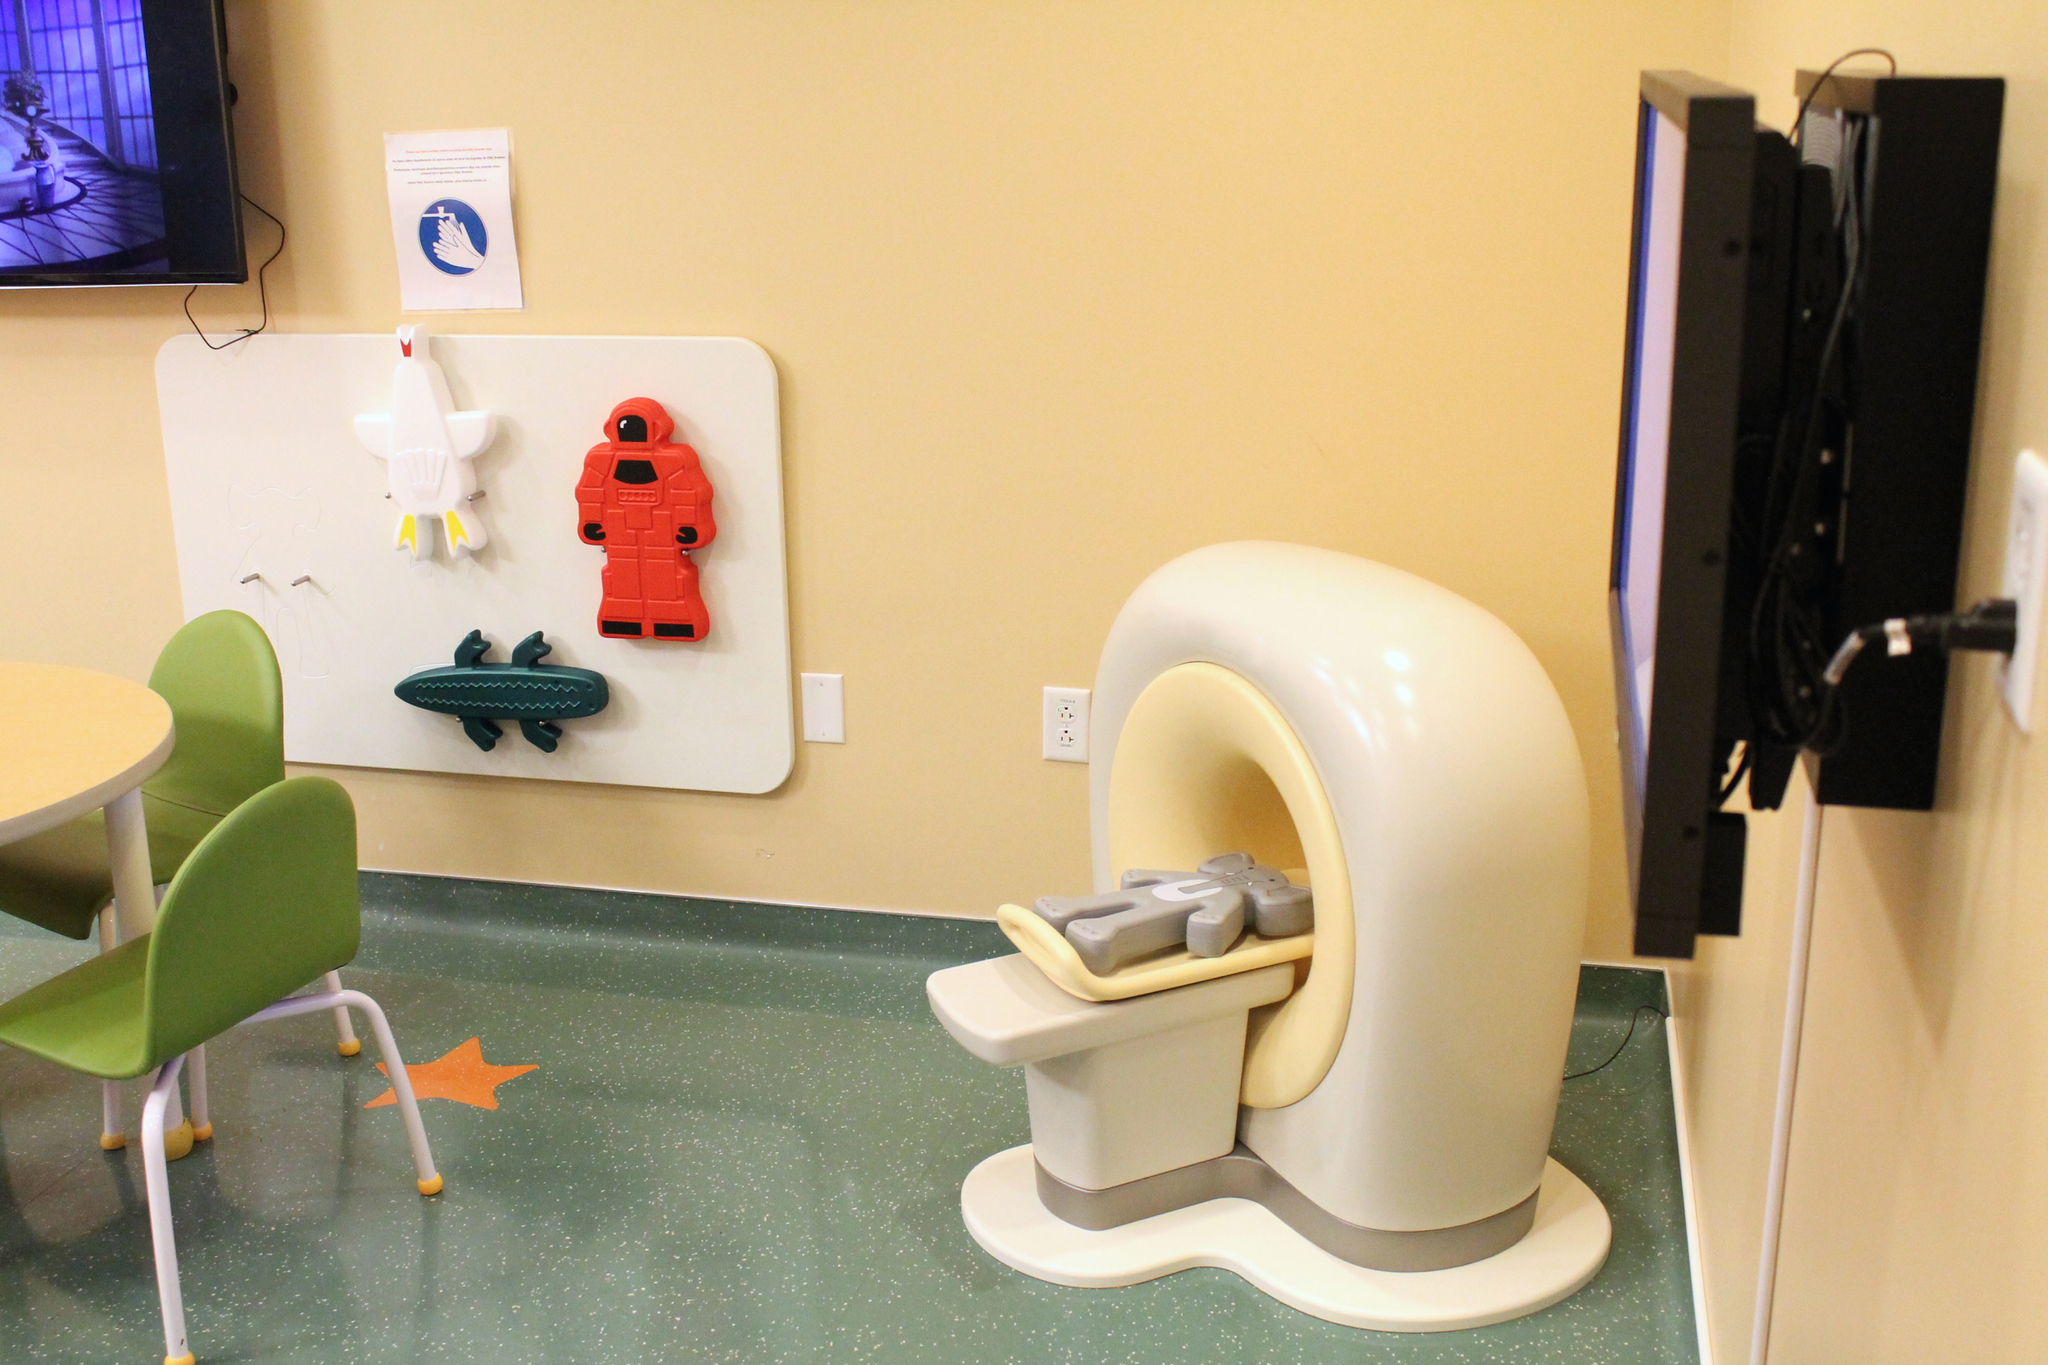 Ucsf Introduces Kittenscanner For Pediatric Patients Ucsf